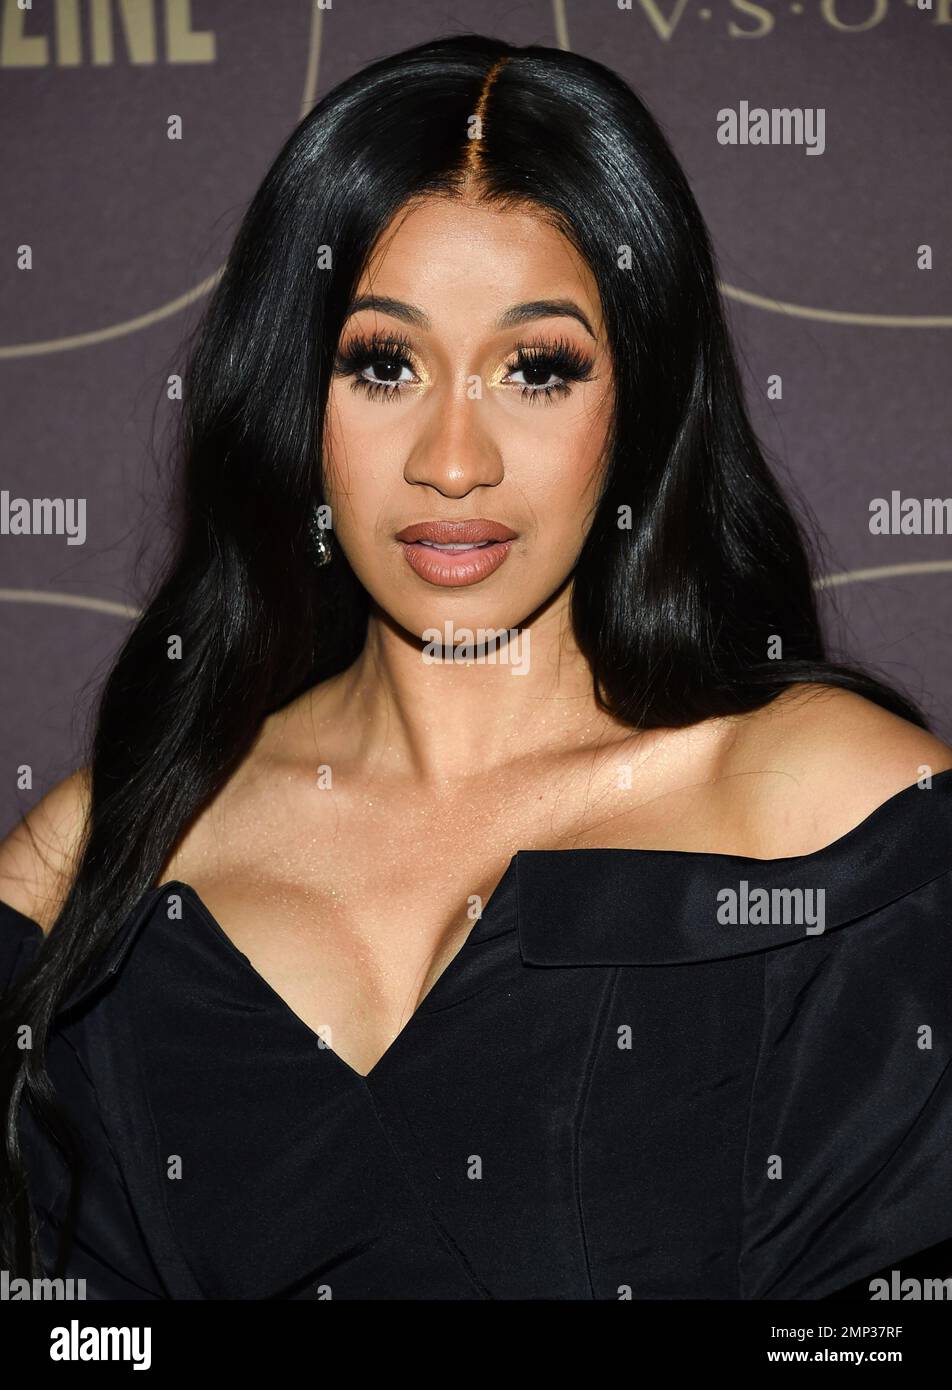 Cardi B attends the Warner Music Group pre-Grammy party at The Grill ...